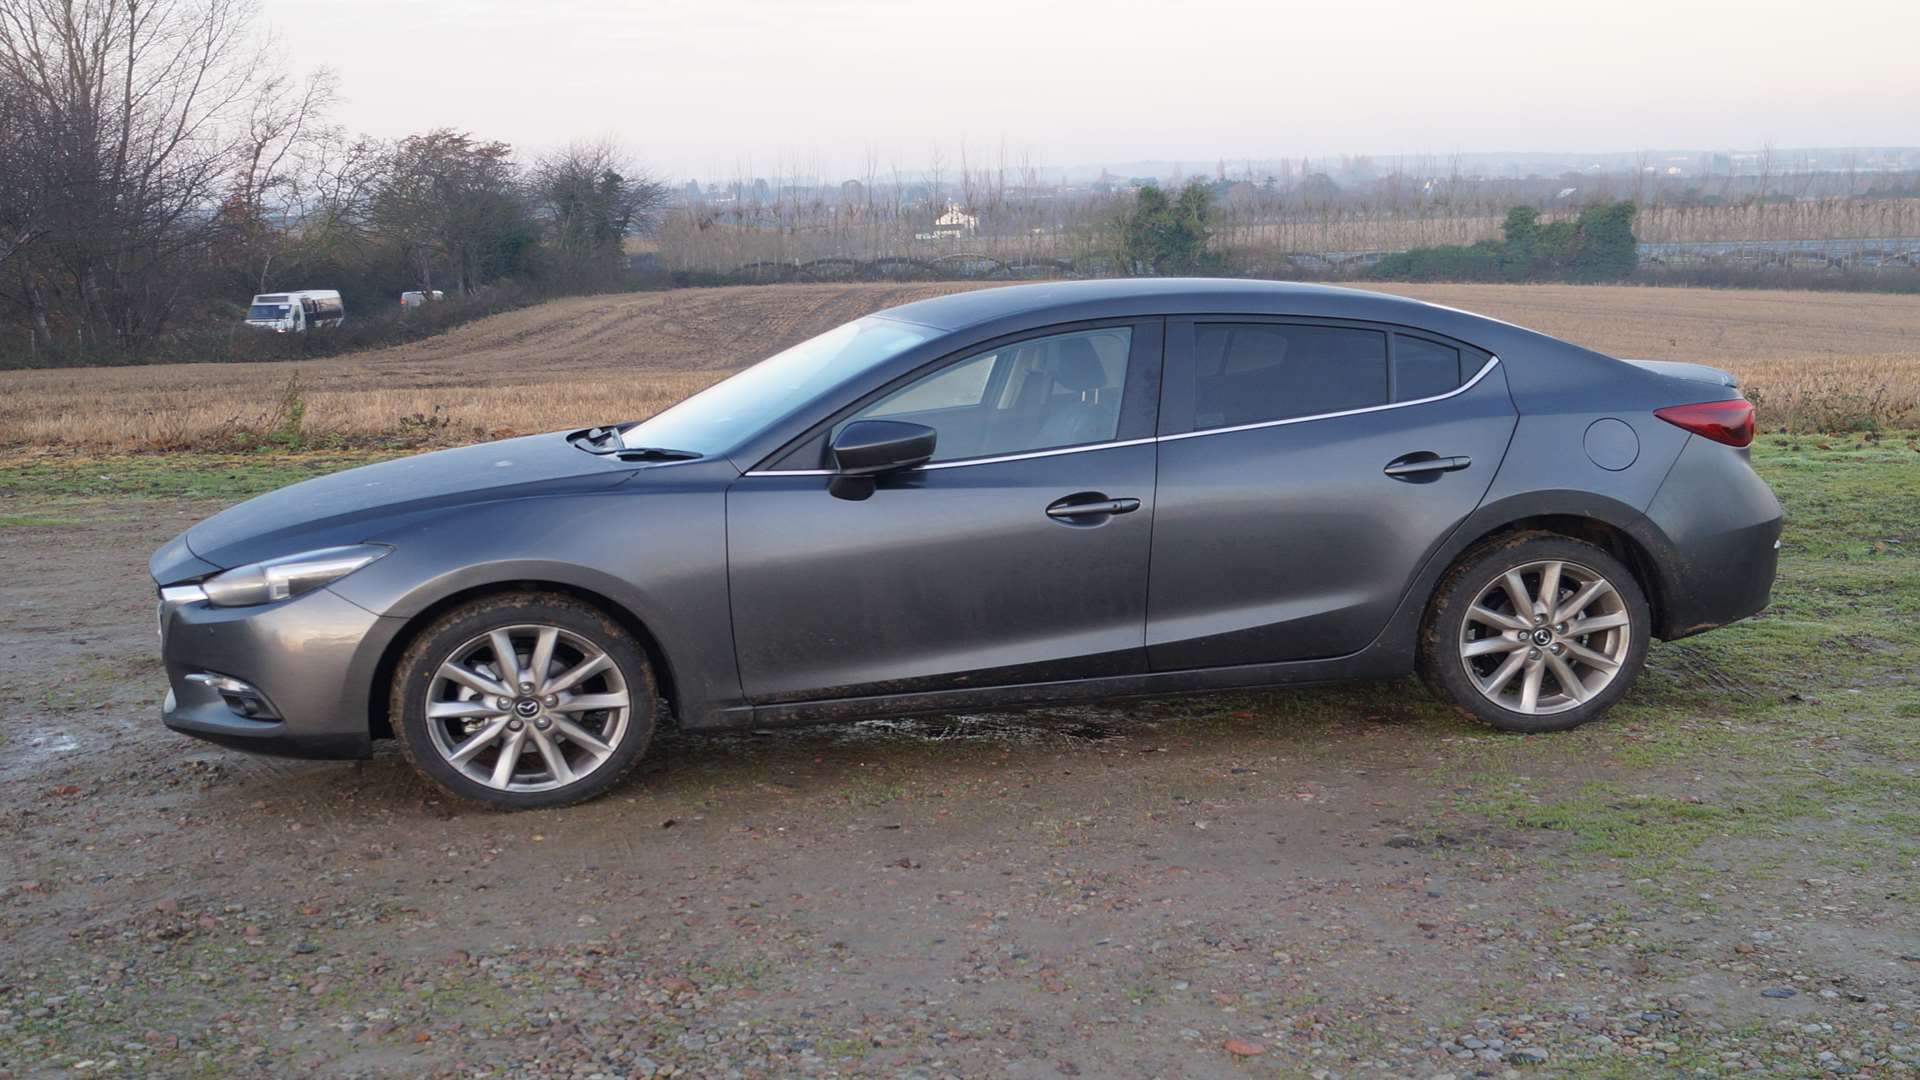 The new Mazda3 is generously equipped - all models are fitted with alloy wheels